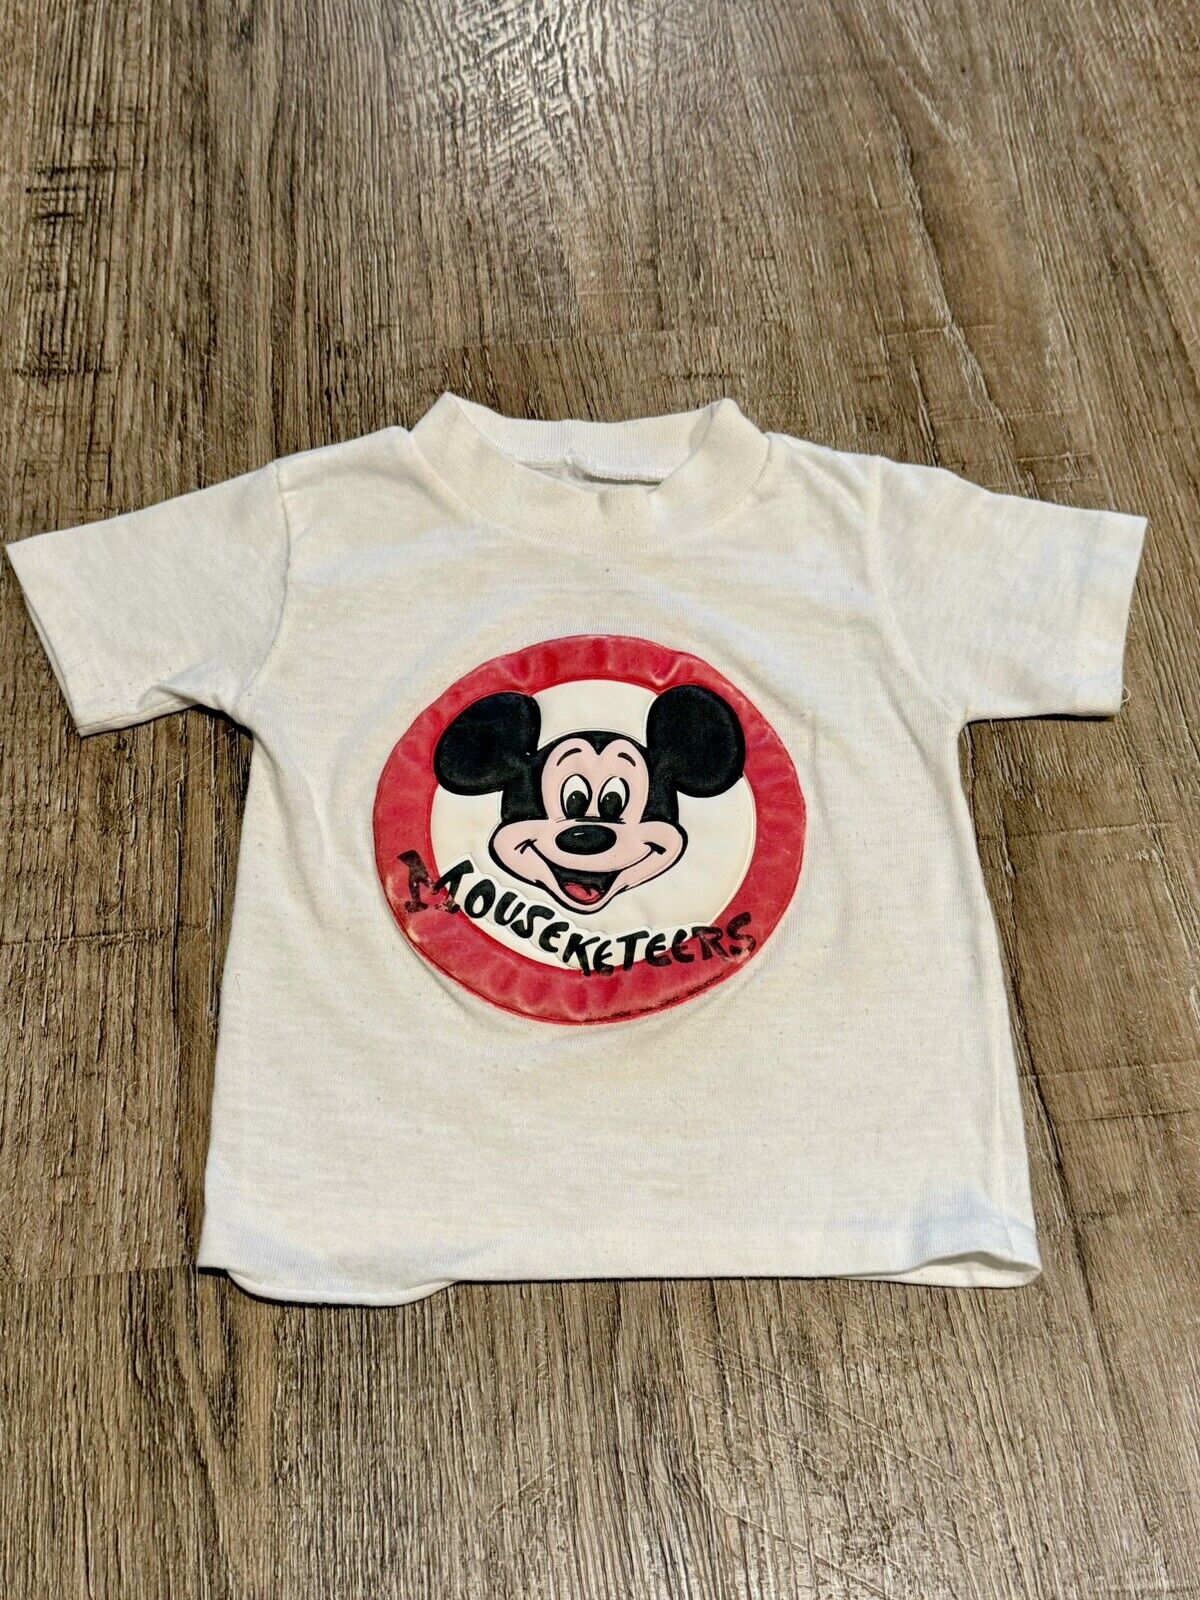 Vintage 1970’s Disney Mickey Mouse Musketeer Shirt